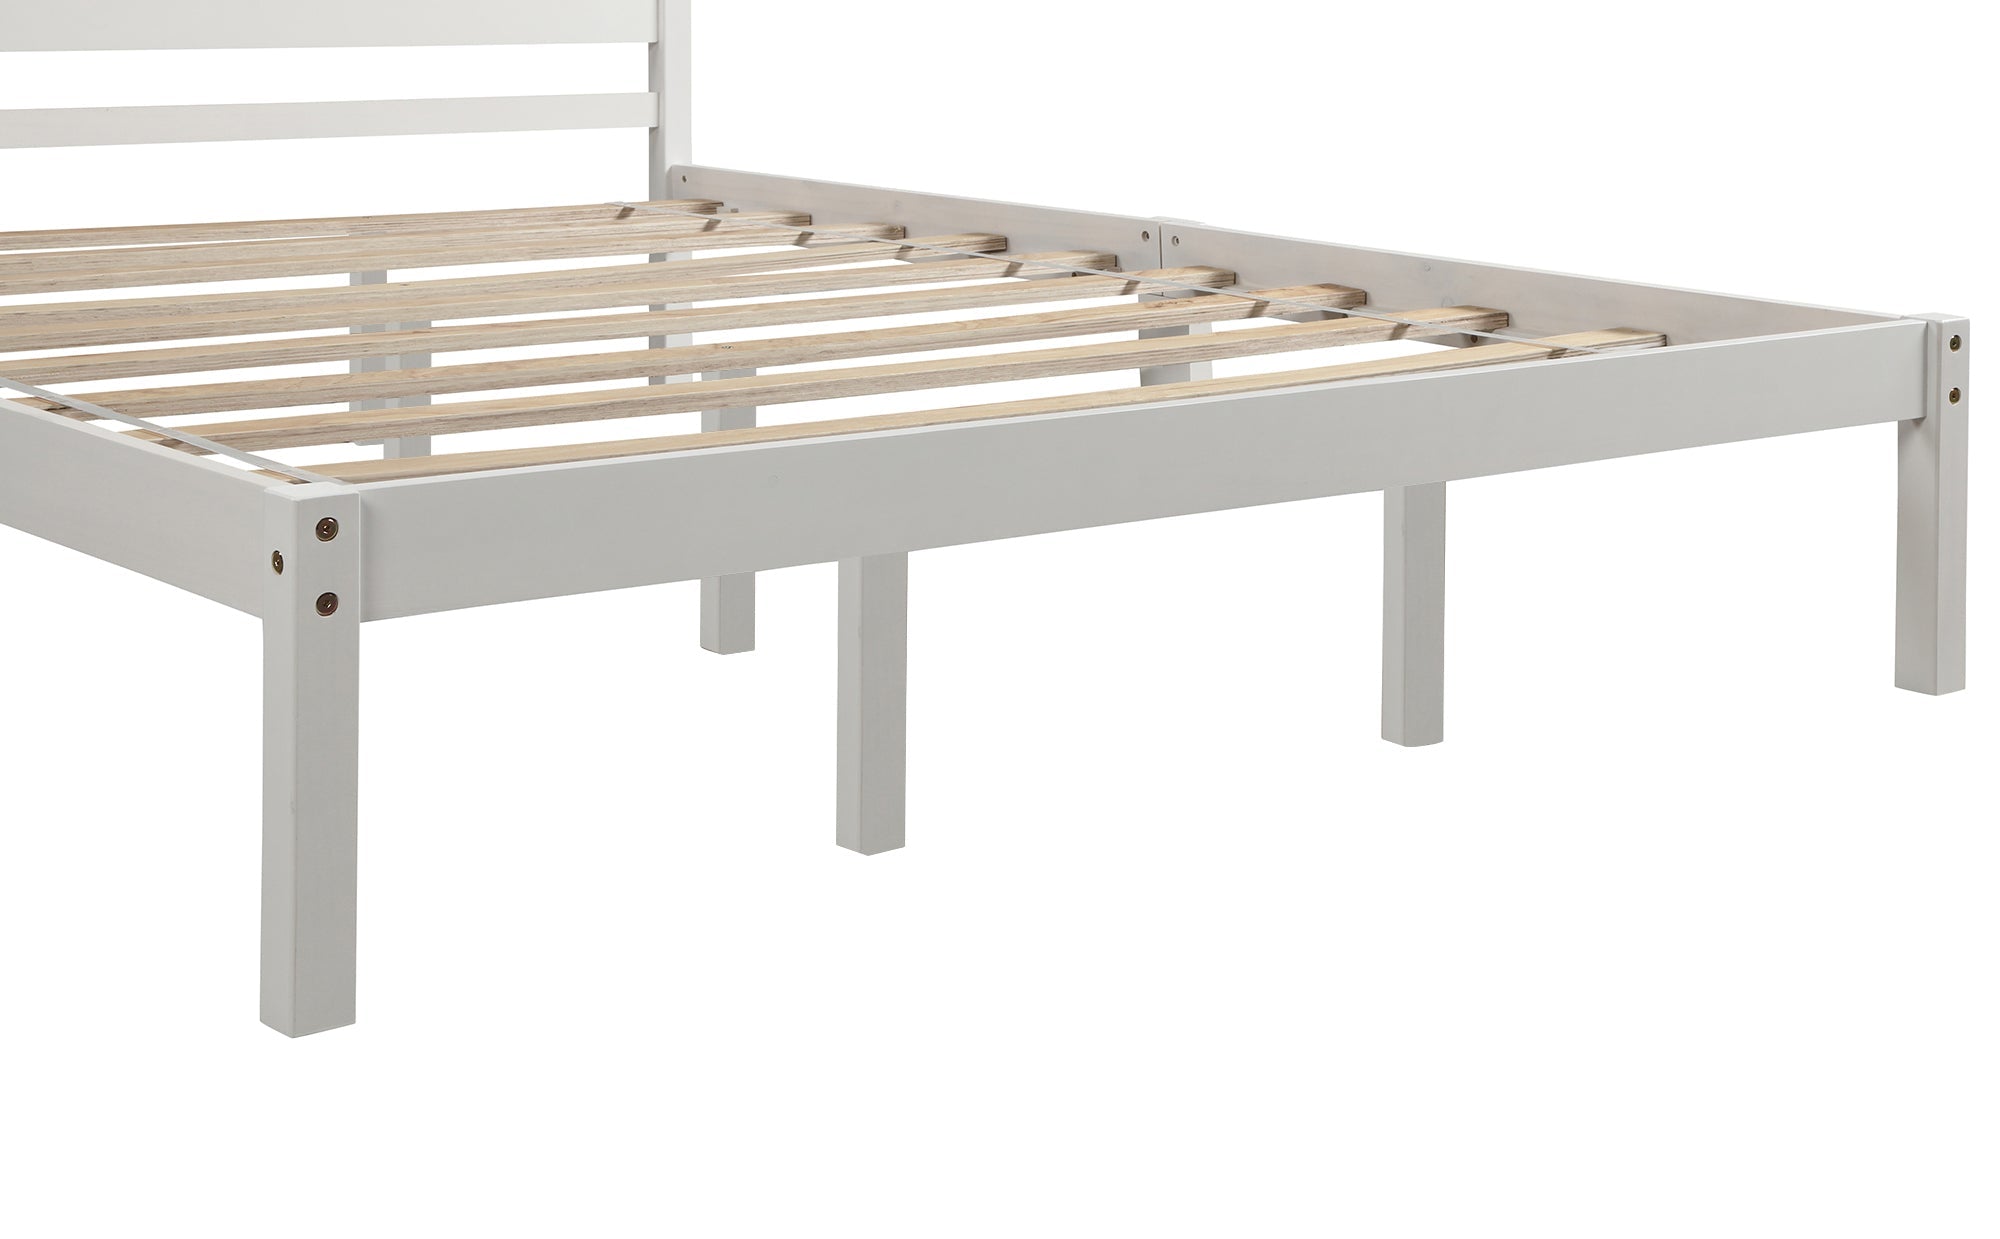 Queen Platform Bed Frame with Headboard | Wood Slat Support | No Box Spring Needed | White Finish